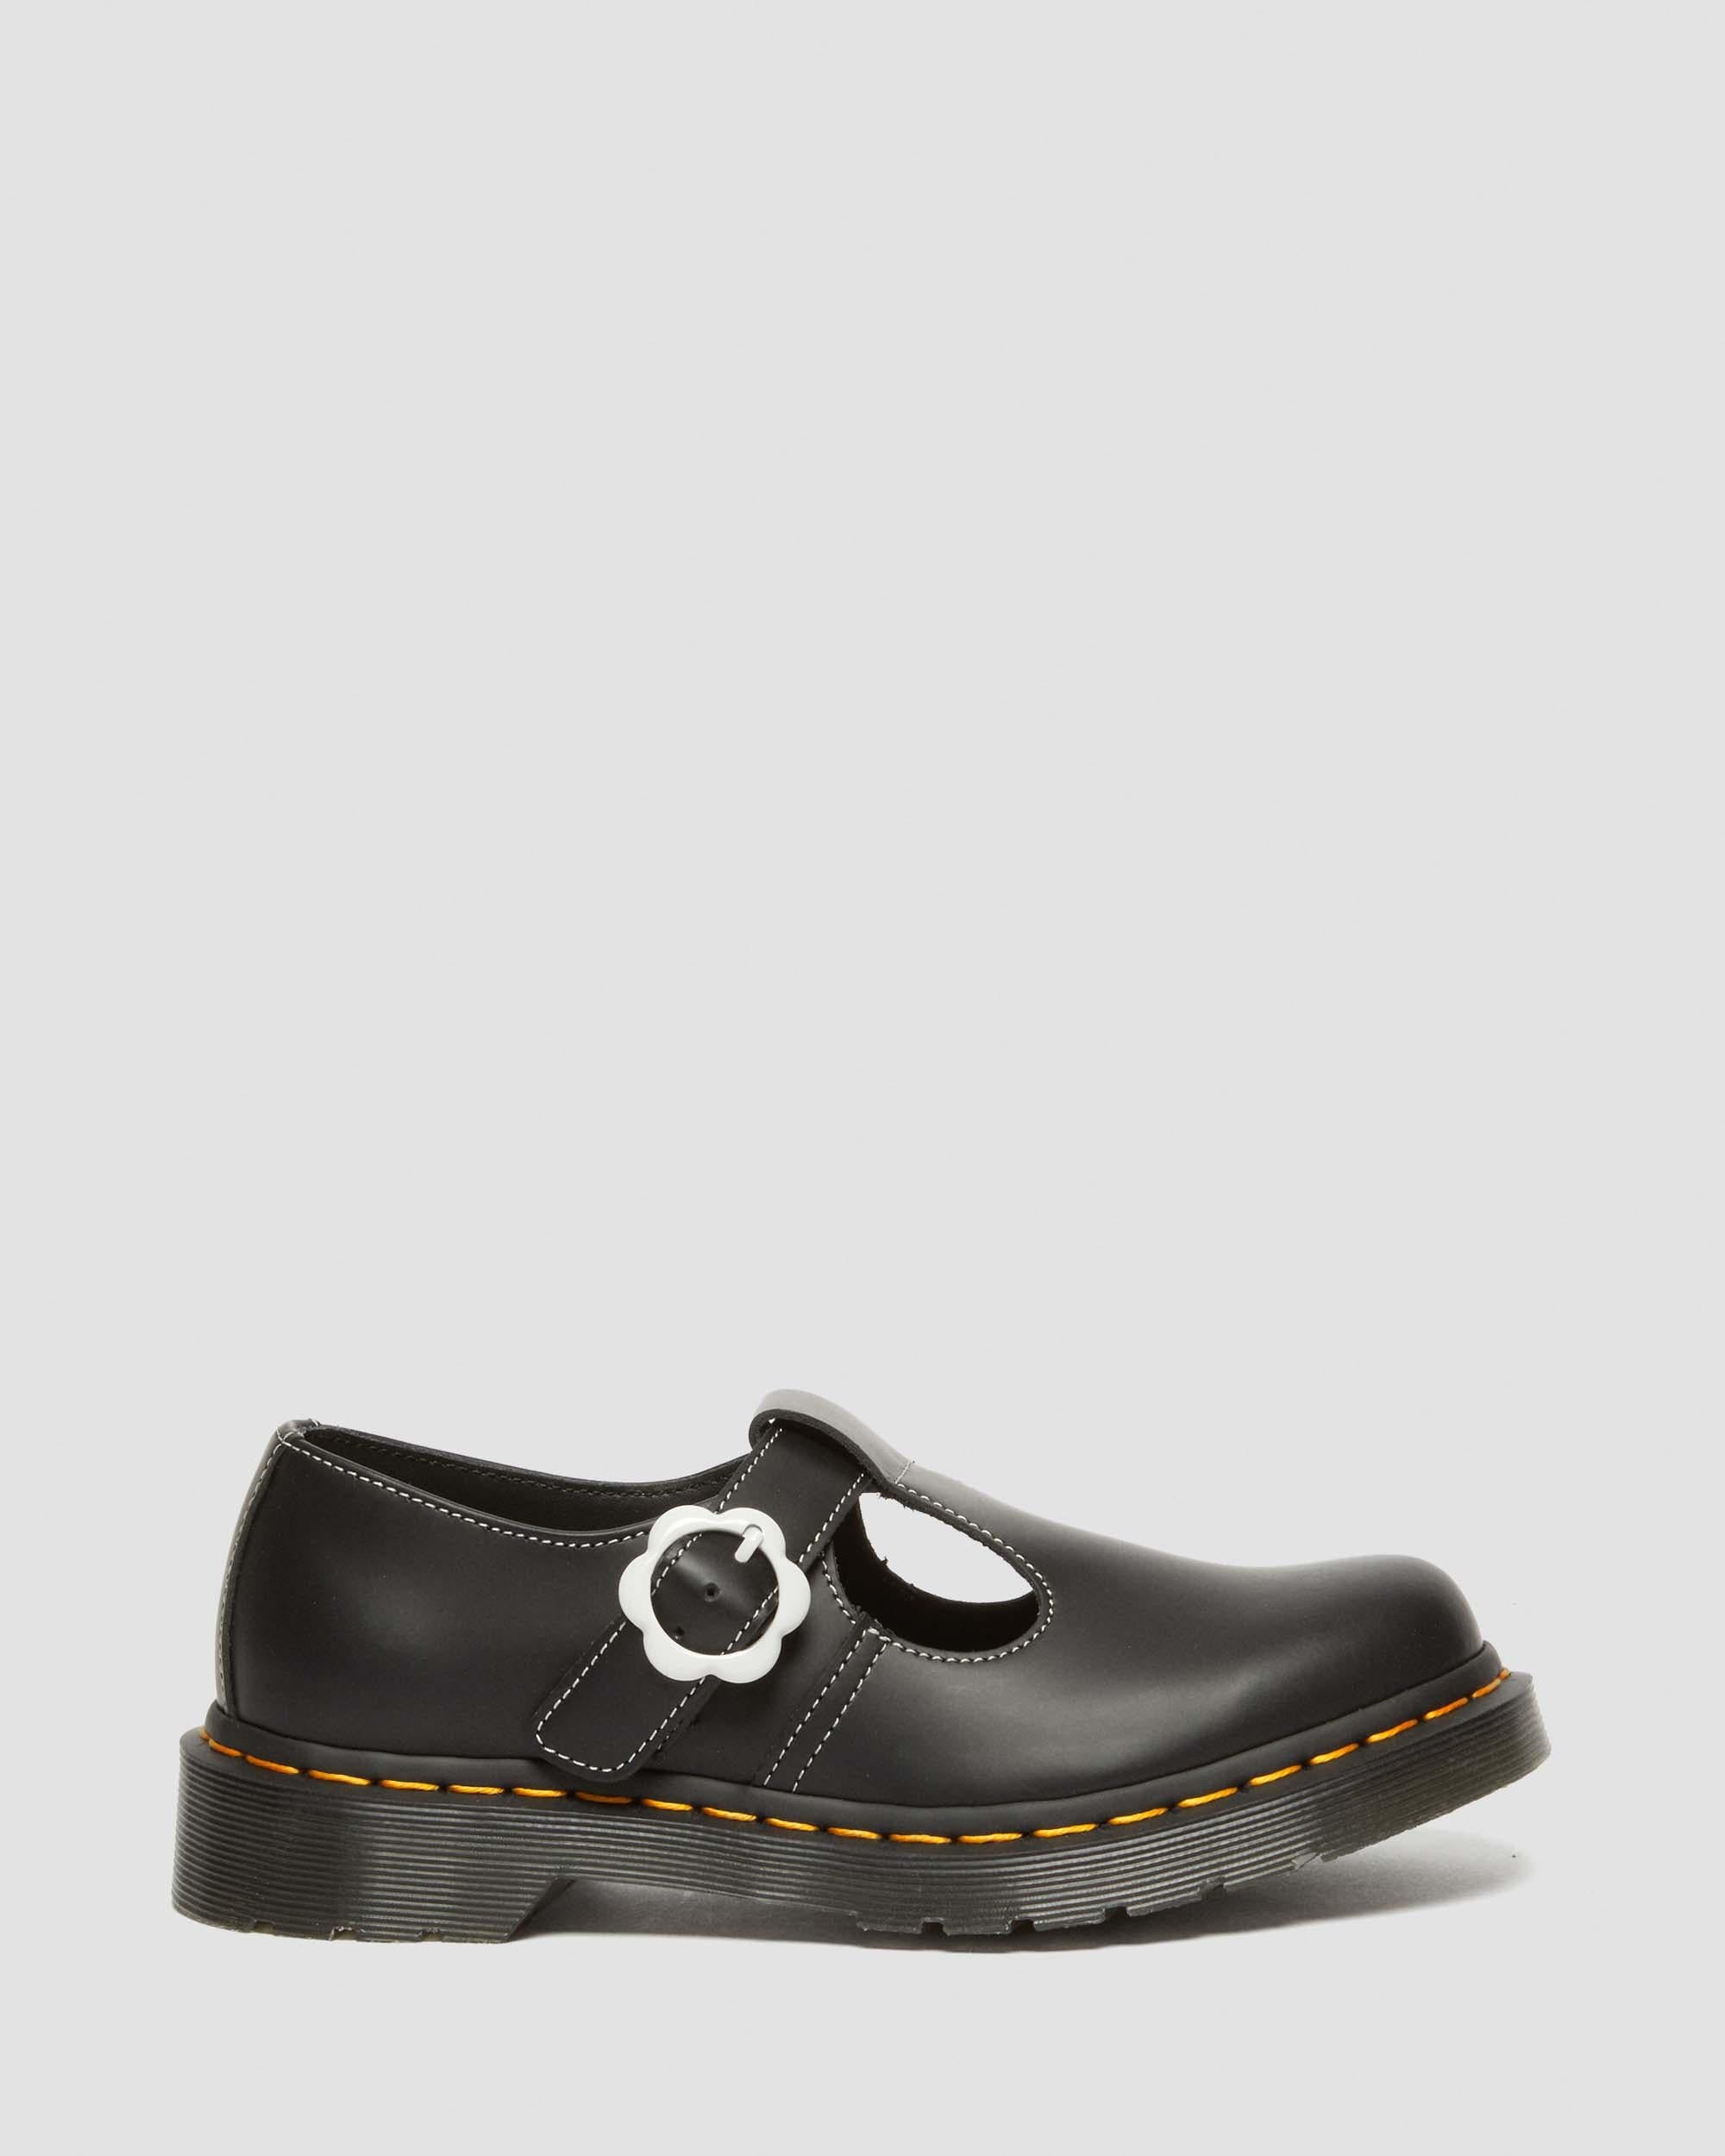 POLLEY FLWR SMOOTH LEATHER SHOES